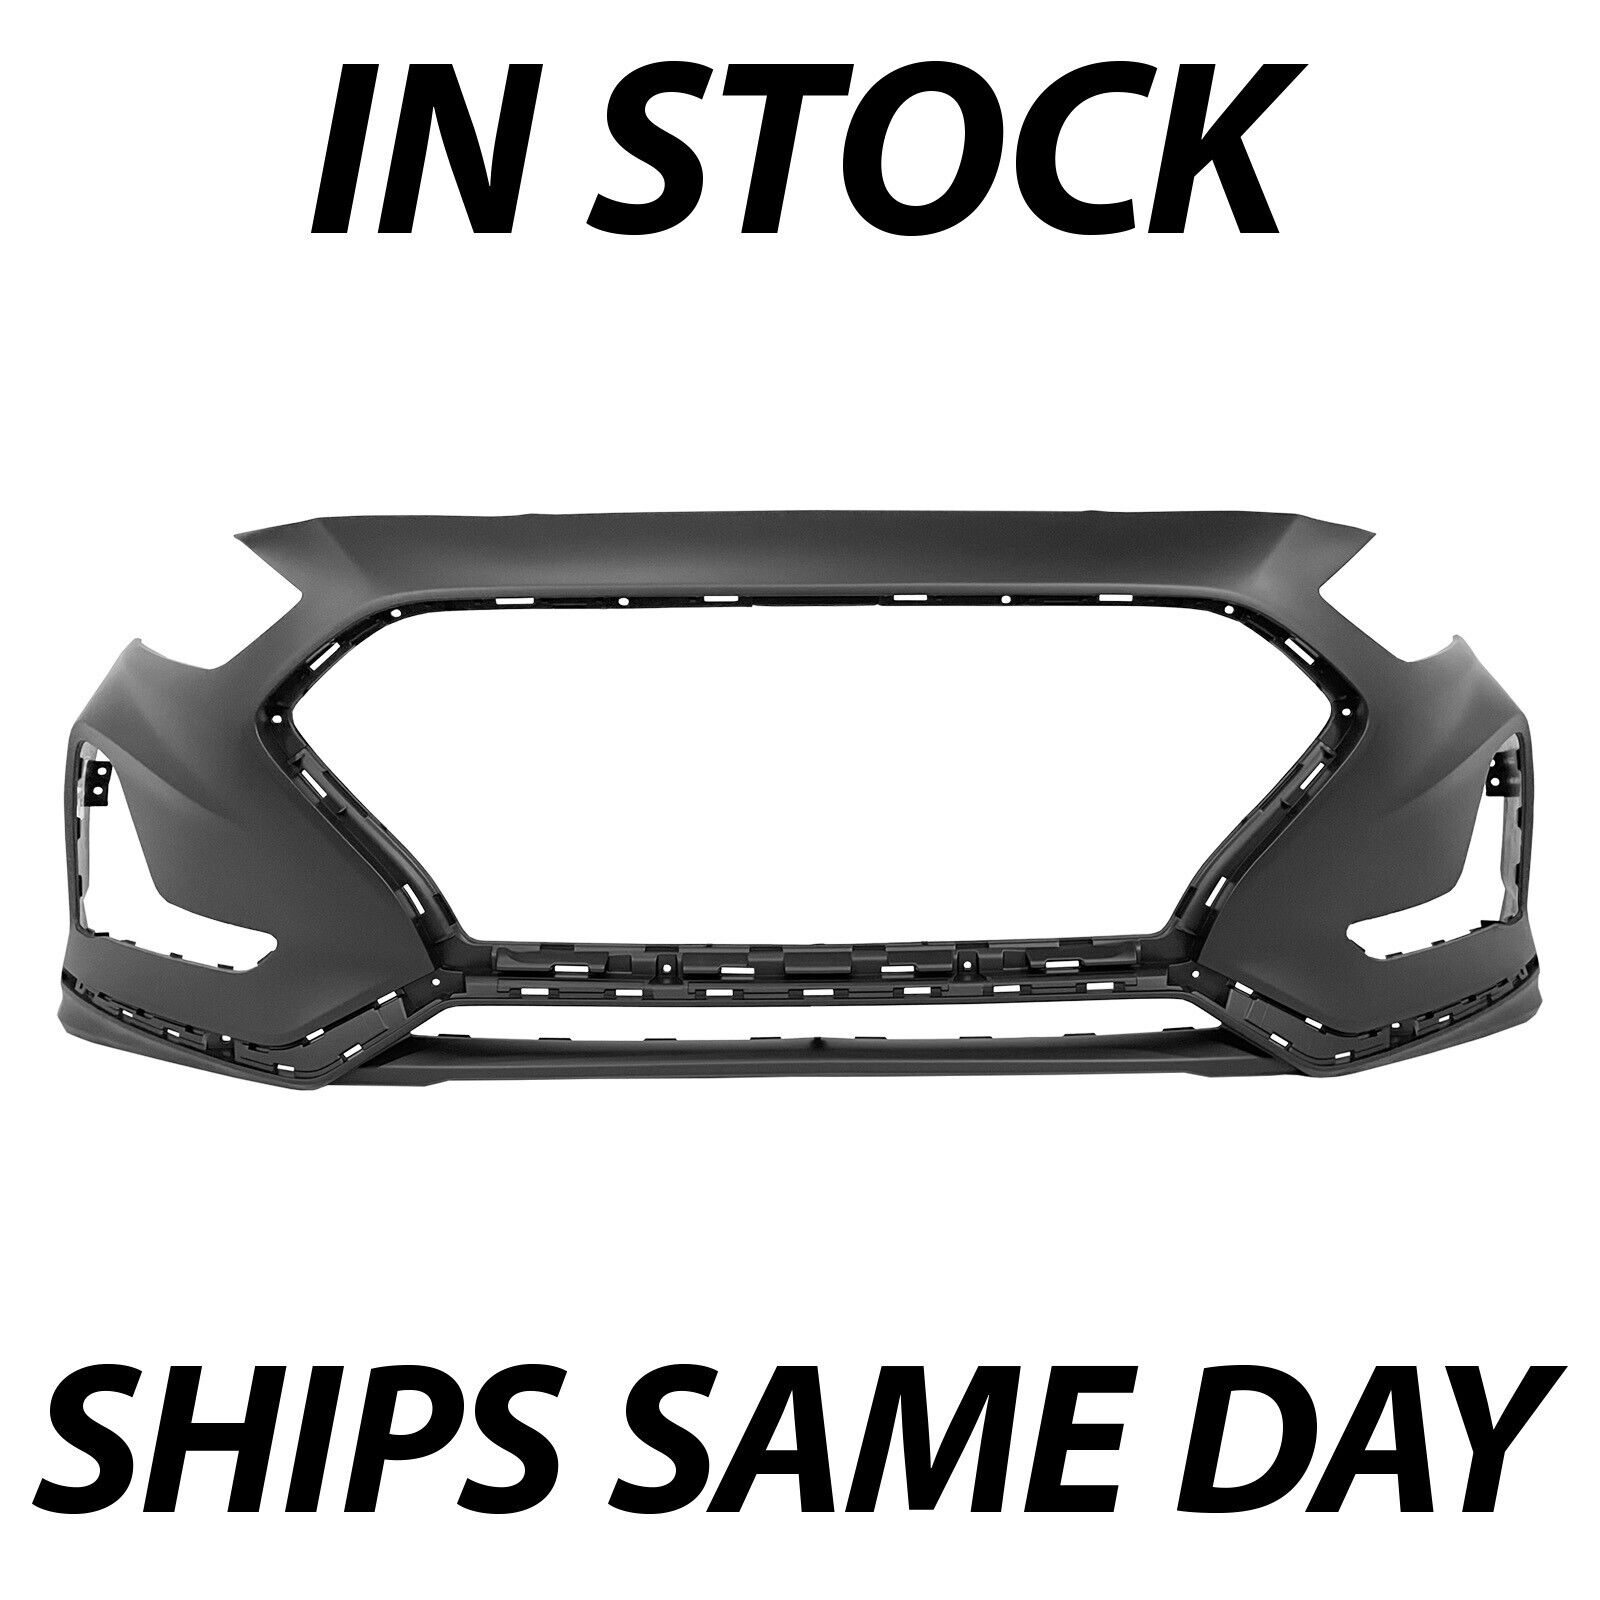 NEW Primered - Front Bumper Cover Replacement for 2018 2019 Hyundai Sonata 18 19